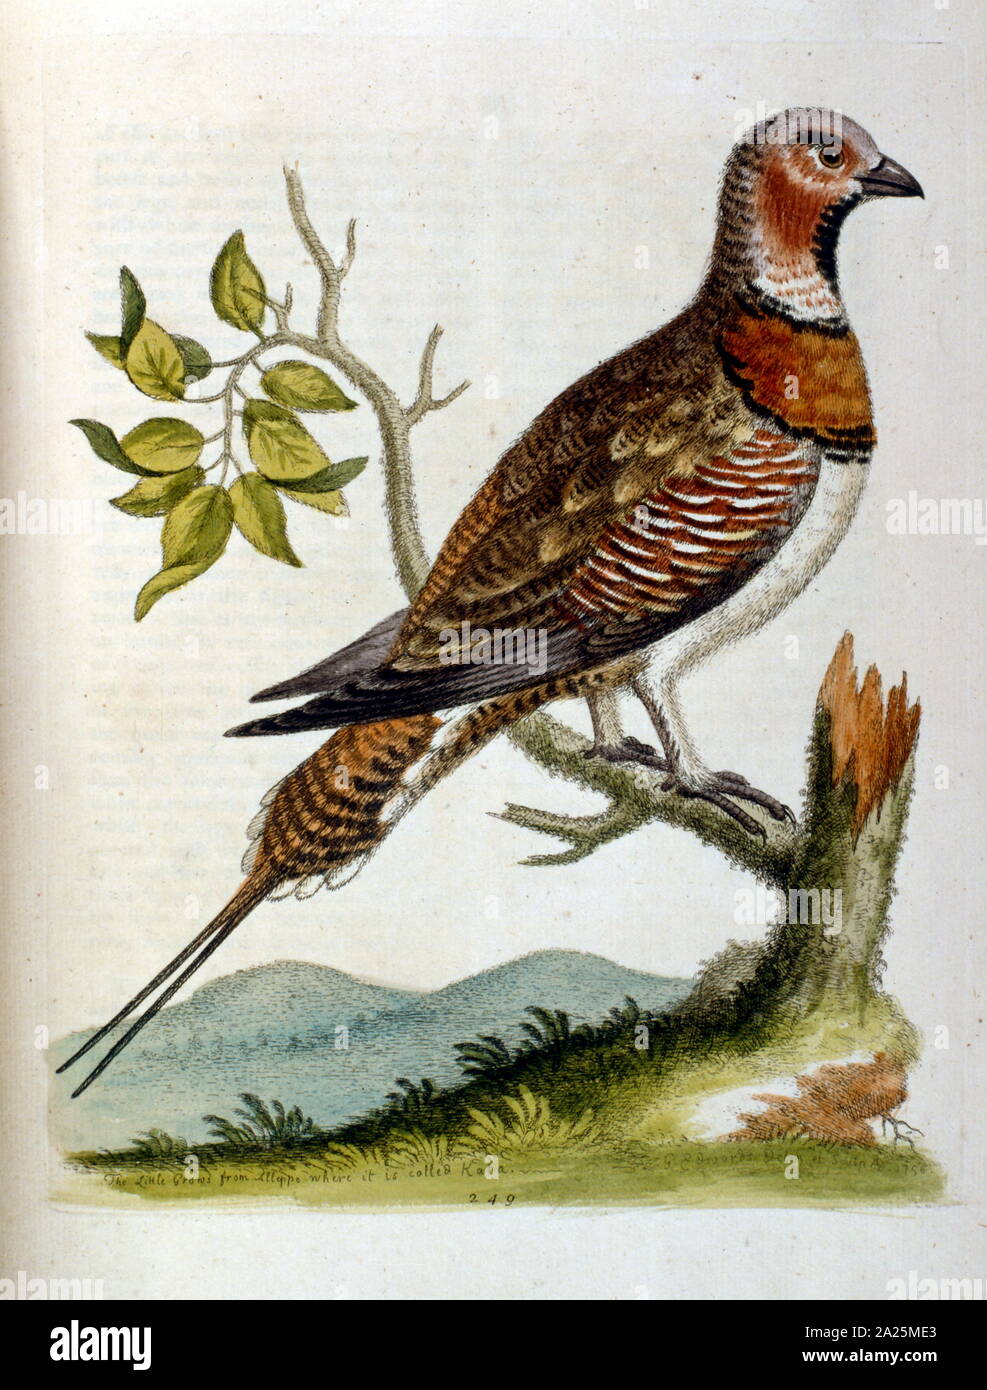 watercolour illustration from a book of rare birds by G Edwards 1750. George Edwards (1694-1773) was a British naturalist and ornithologist. He travelled extensively through Europe, studying natural history and birds in particular. He gained some recognition for his coloured drawings, and published his first work in 1743 - the first volume of A Natural History of Uncommon Birds. Stock Photo